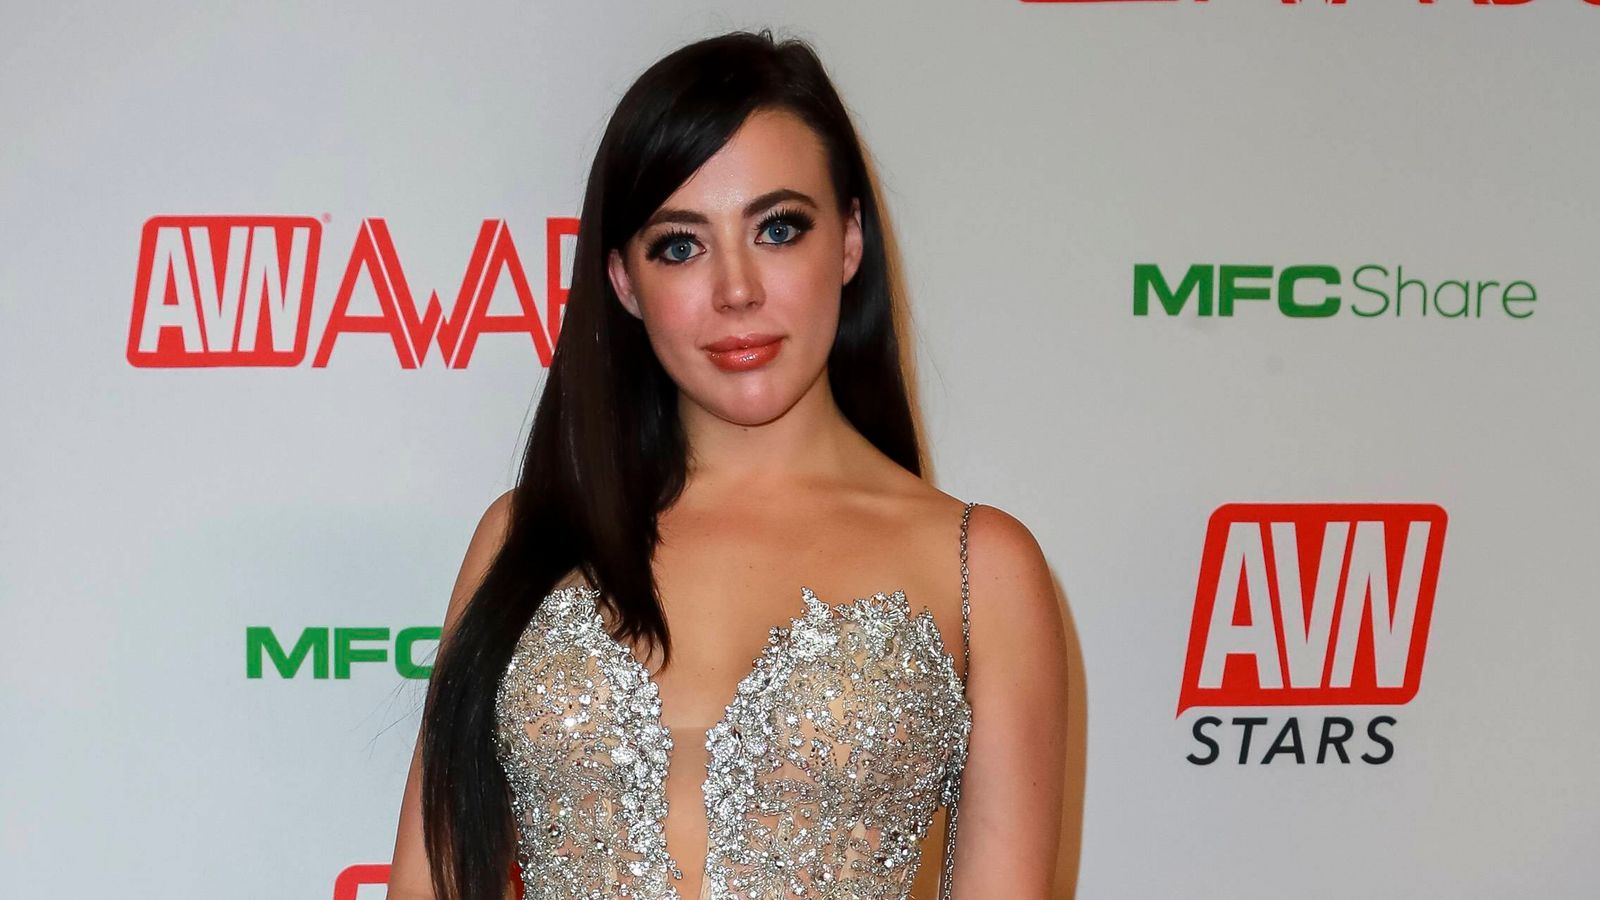 American porn star Whitney Wright sparks anger after visit to Iran